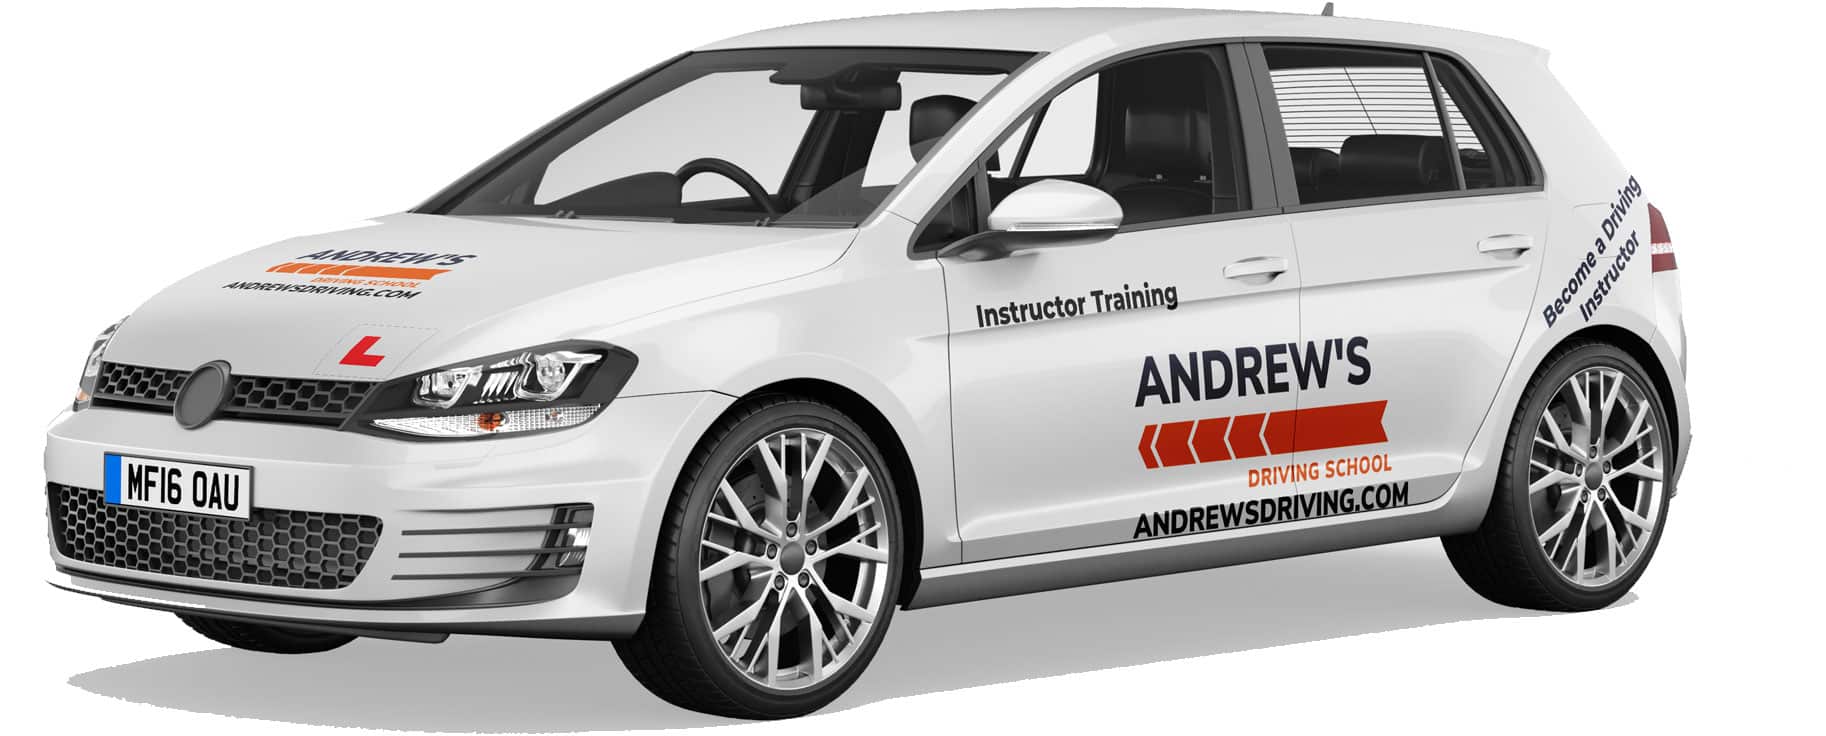 Driving instructor training car